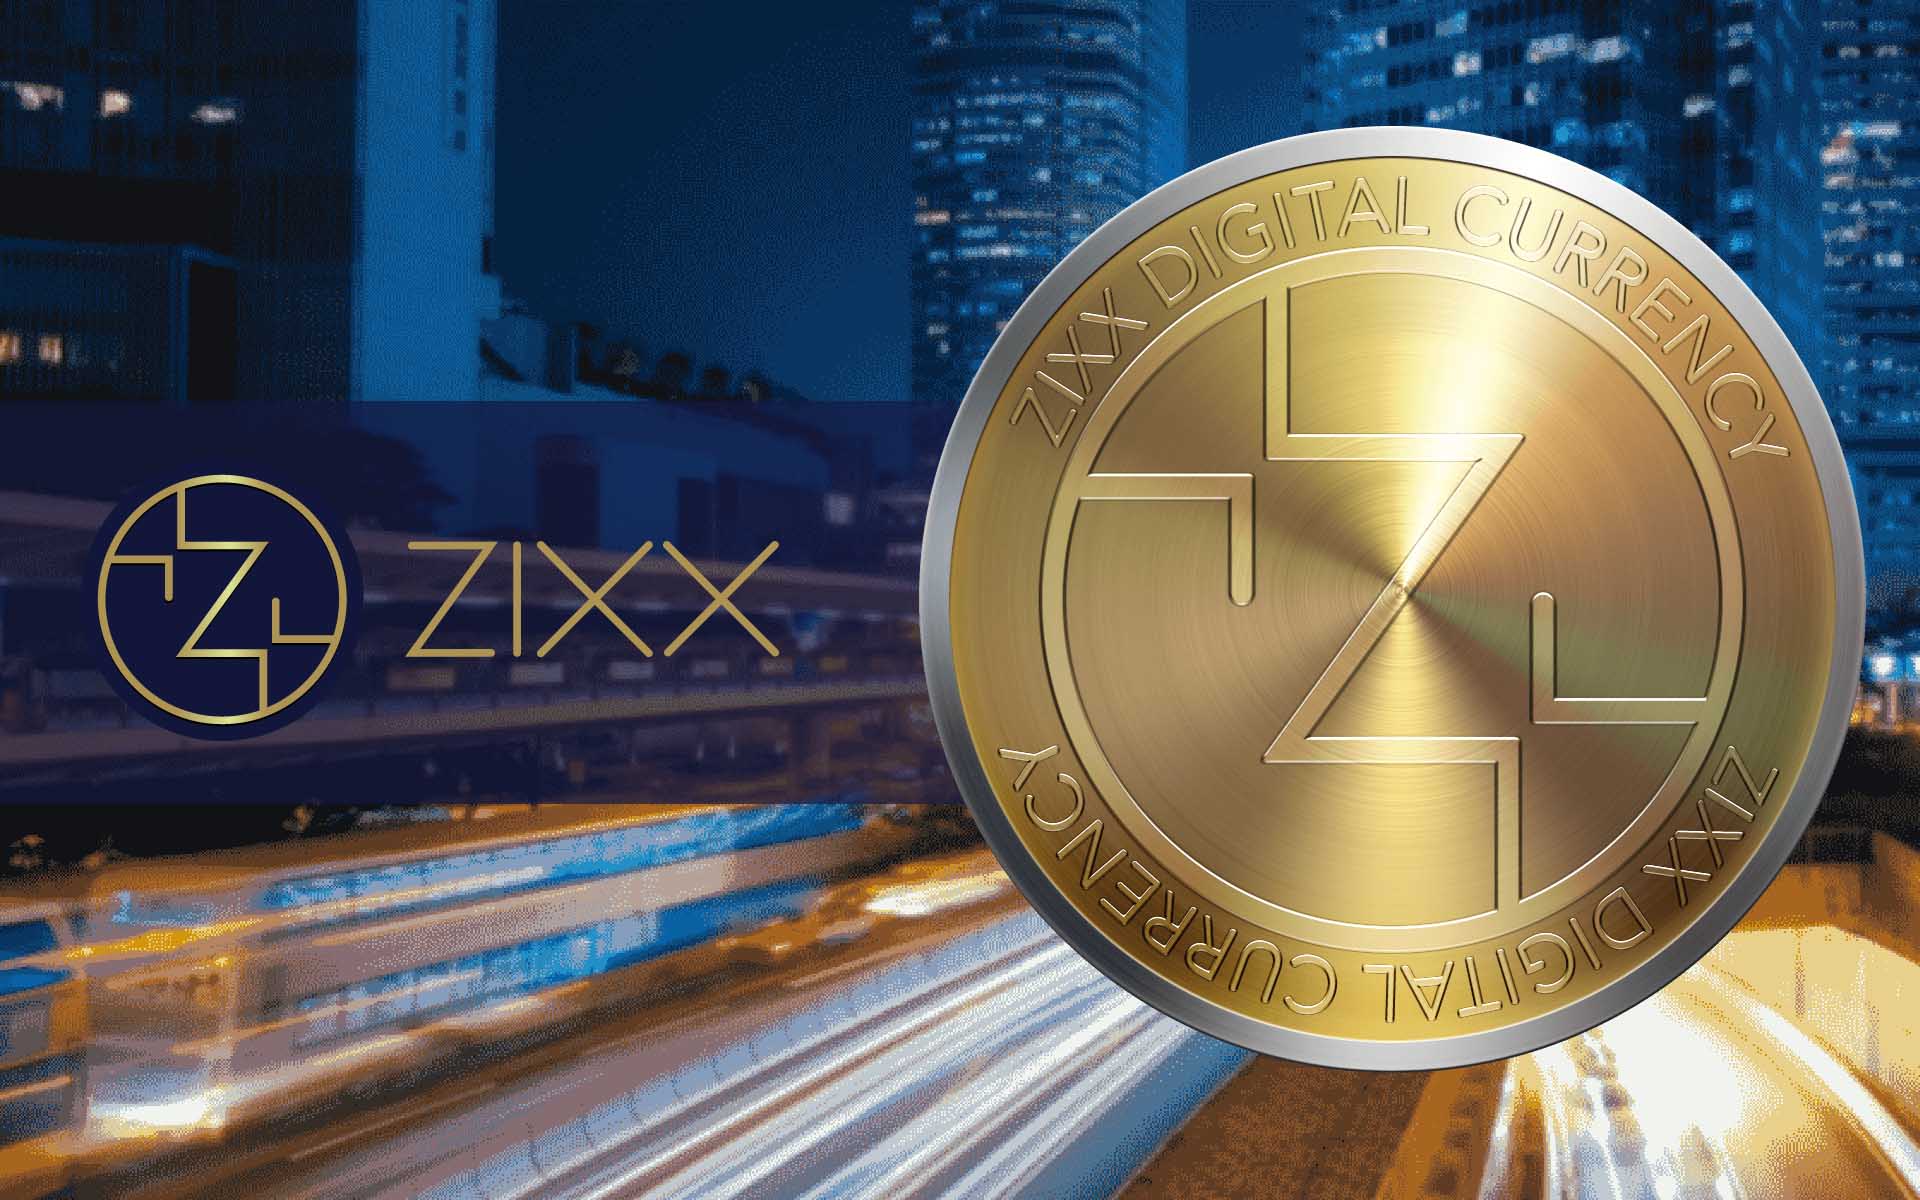 ZIXX Cryptocurrency Is Now Trading